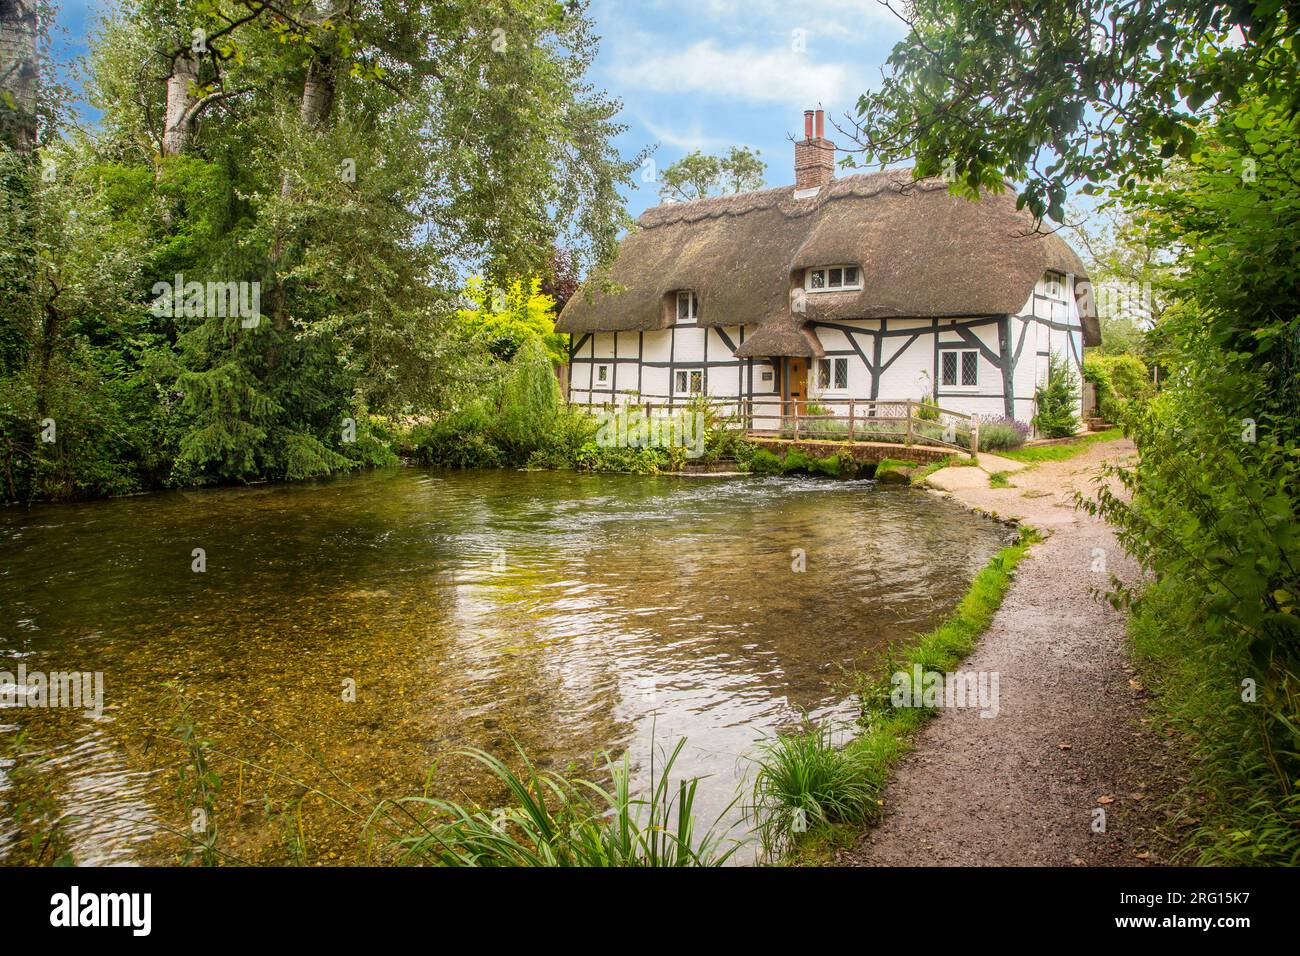 the Fulling mill in the Hampshire village of Alresford standing on the river Alresford Stock Photo